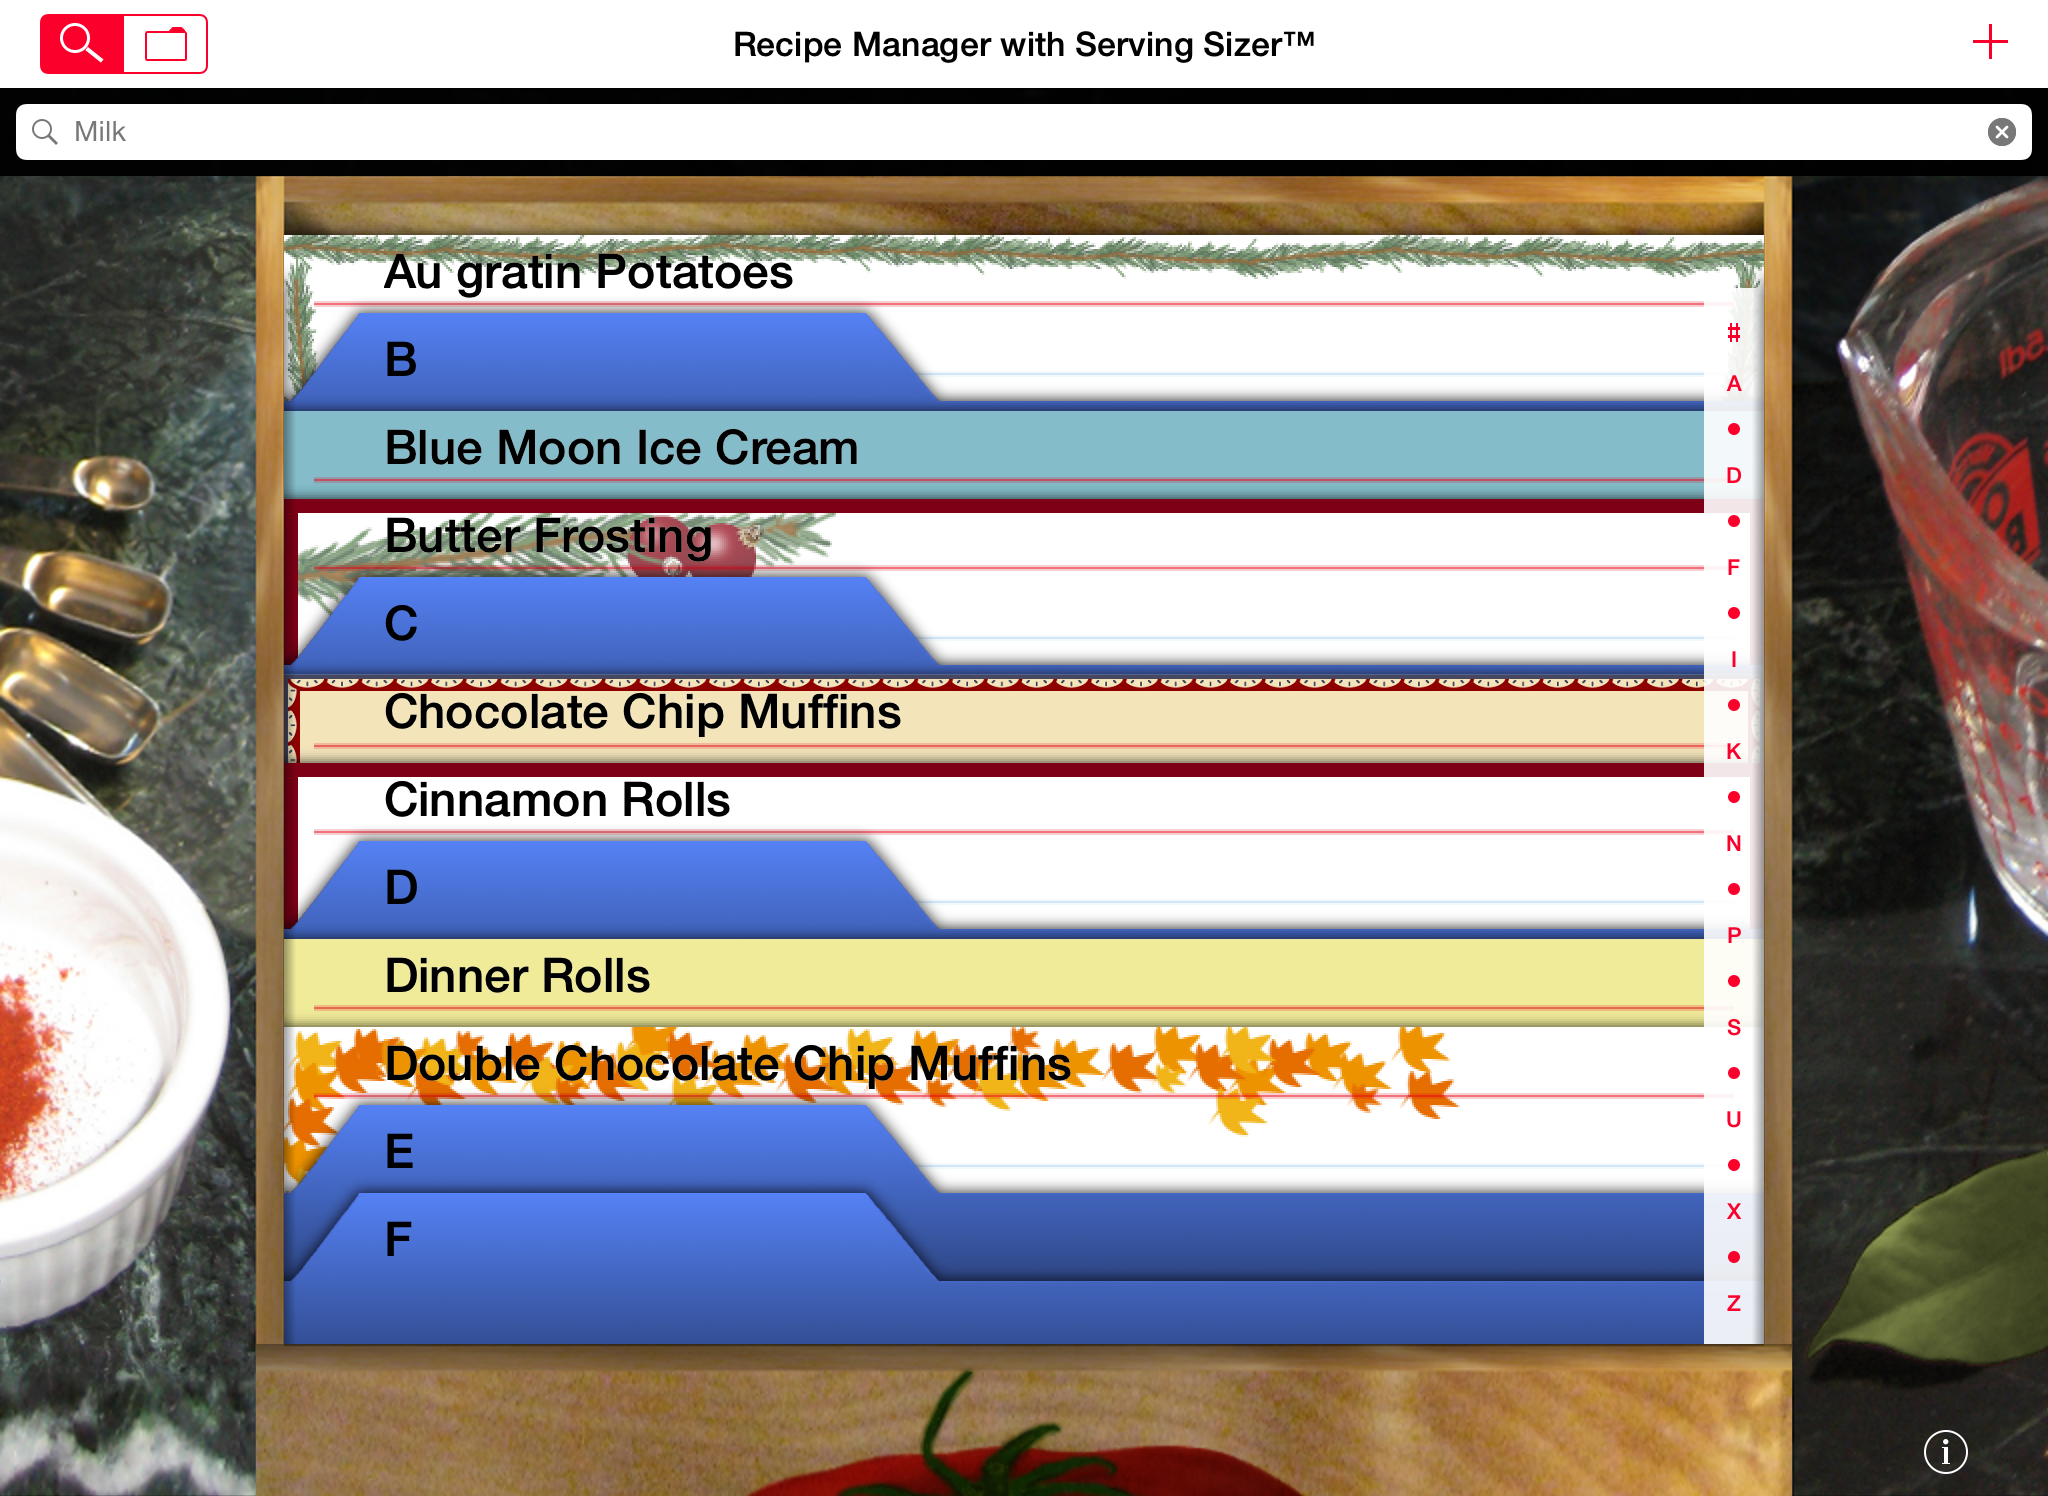 Recipe Manager with Serving Sizer search by milk